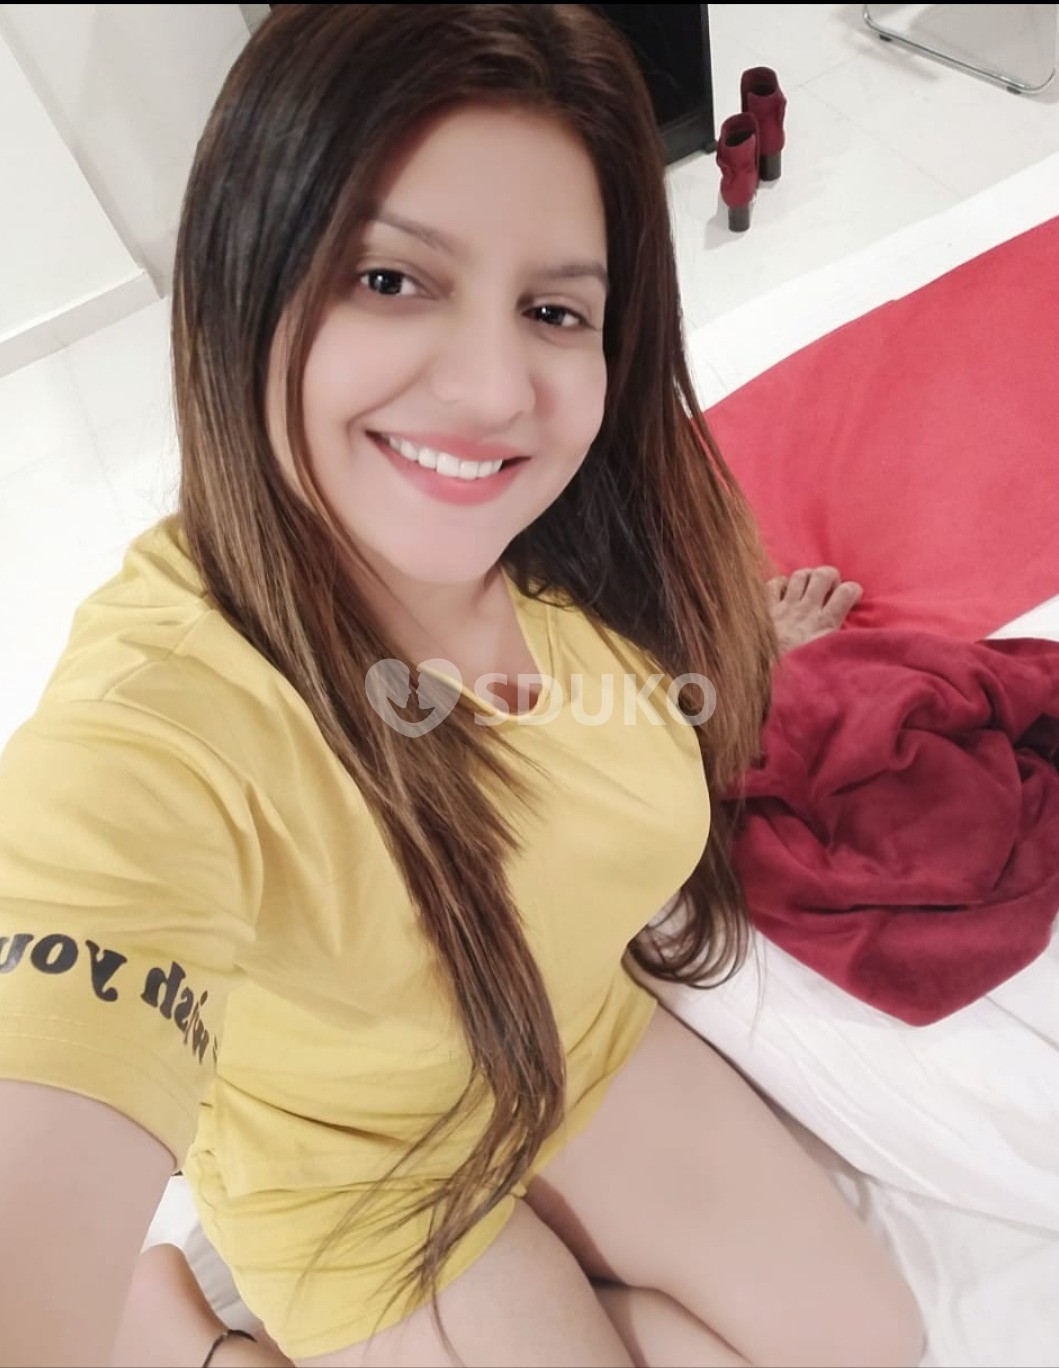 MG ROAD HOT MODEL 👅💋 AVAILABLE FOR SEX ANYTIME CALL ME